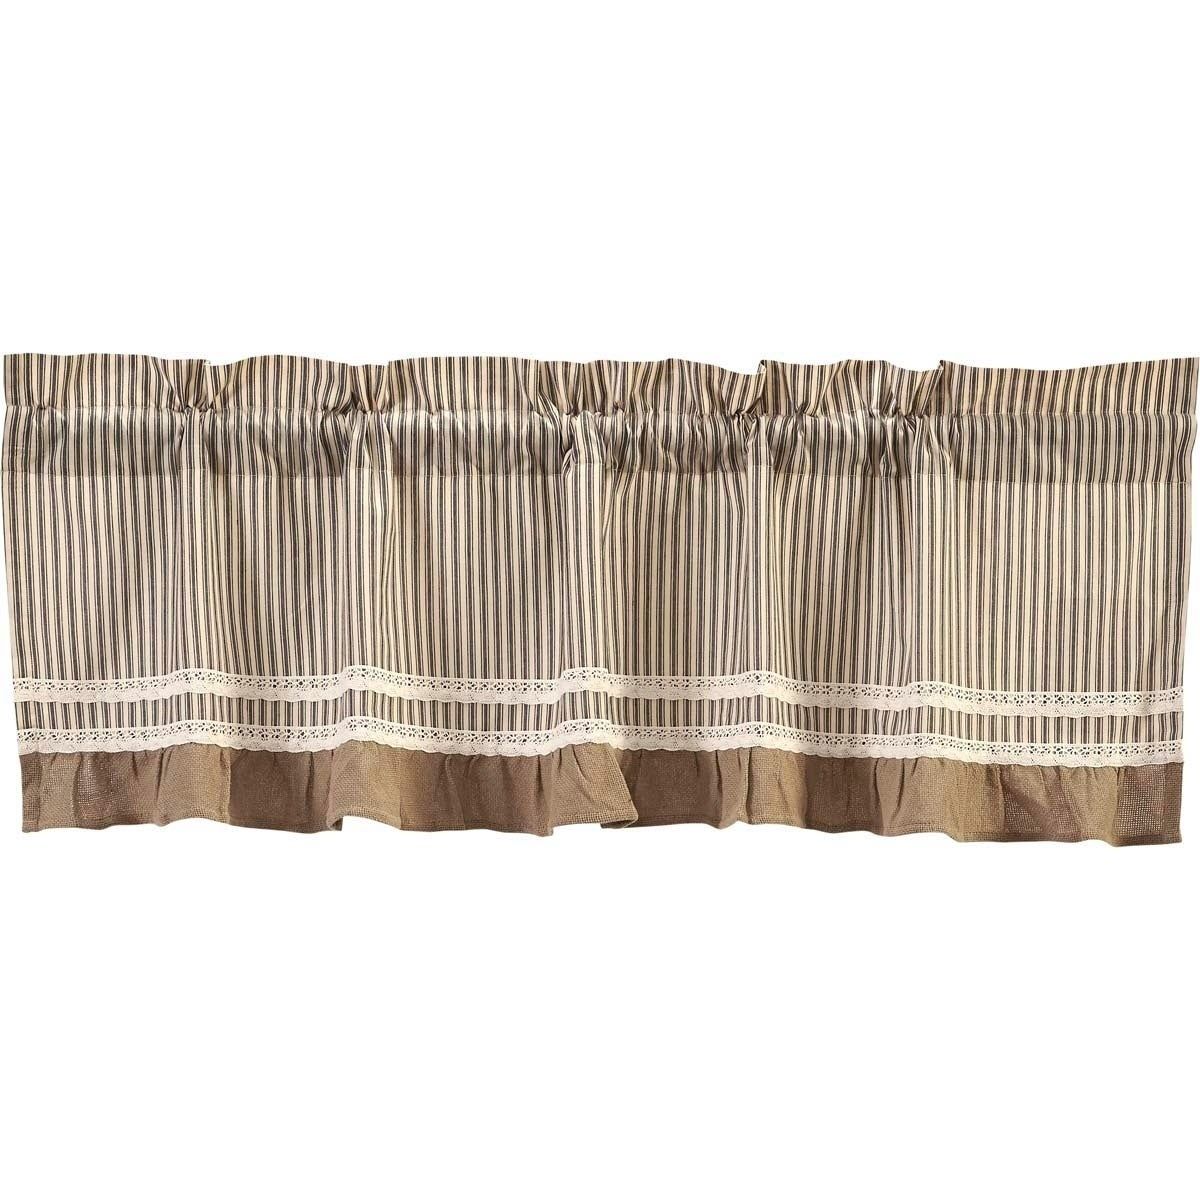 Details About Farmhouse Kitchen Curtains Vhc Kendra Stripe Valance Rod Intended For Farmhouse Stripe Kitchen Tier Pairs (View 7 of 20)